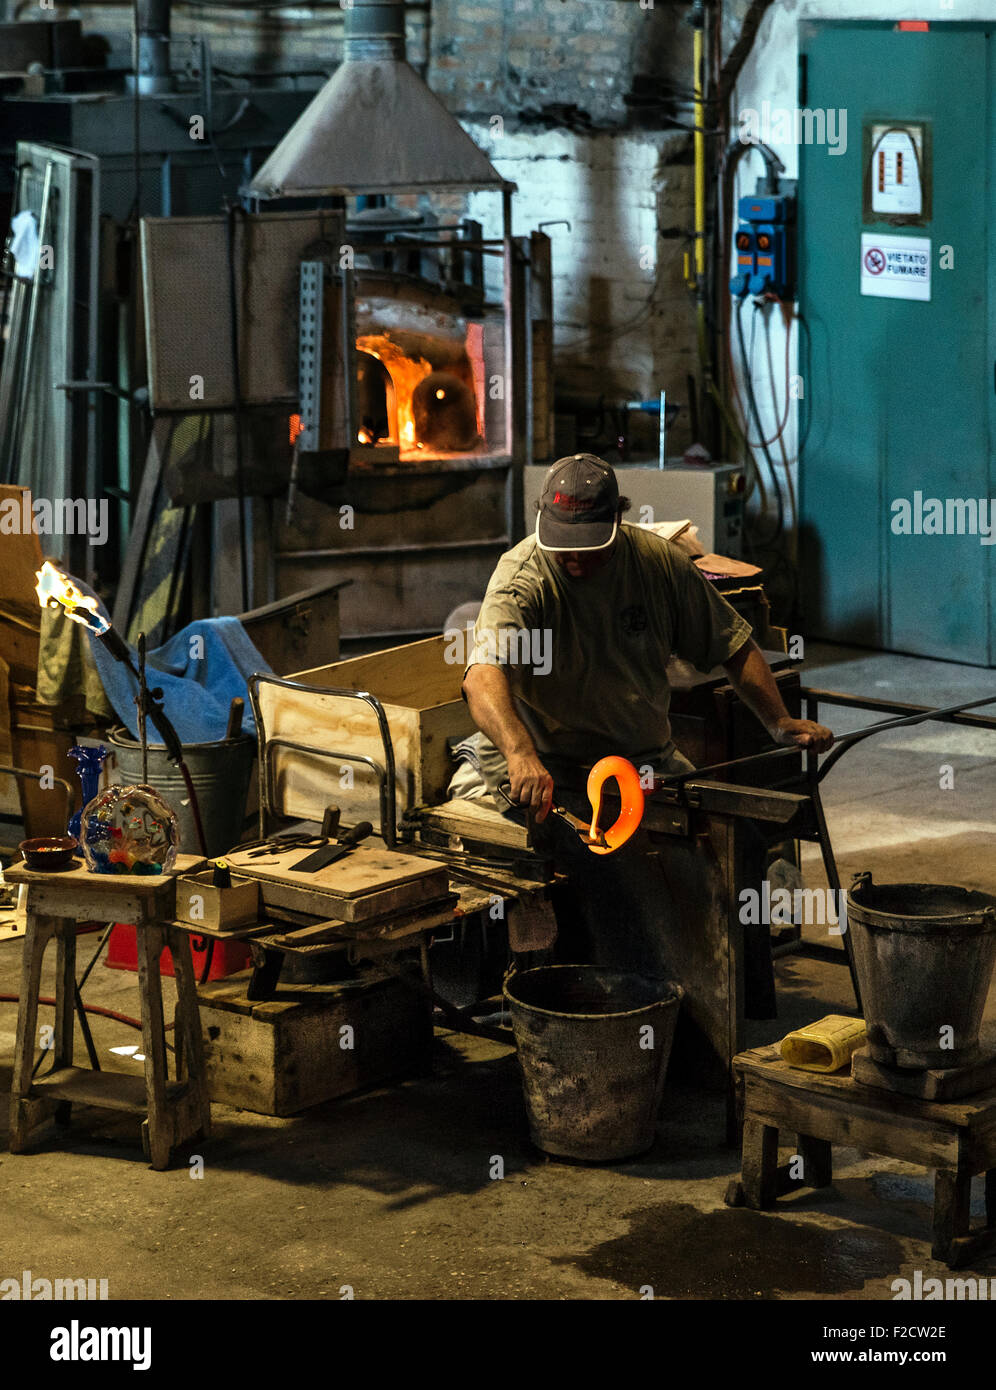 Glassmith working, Venitian island of Murano, Italy. Famous for it's many furnaces and hand made glass. Stock Photo